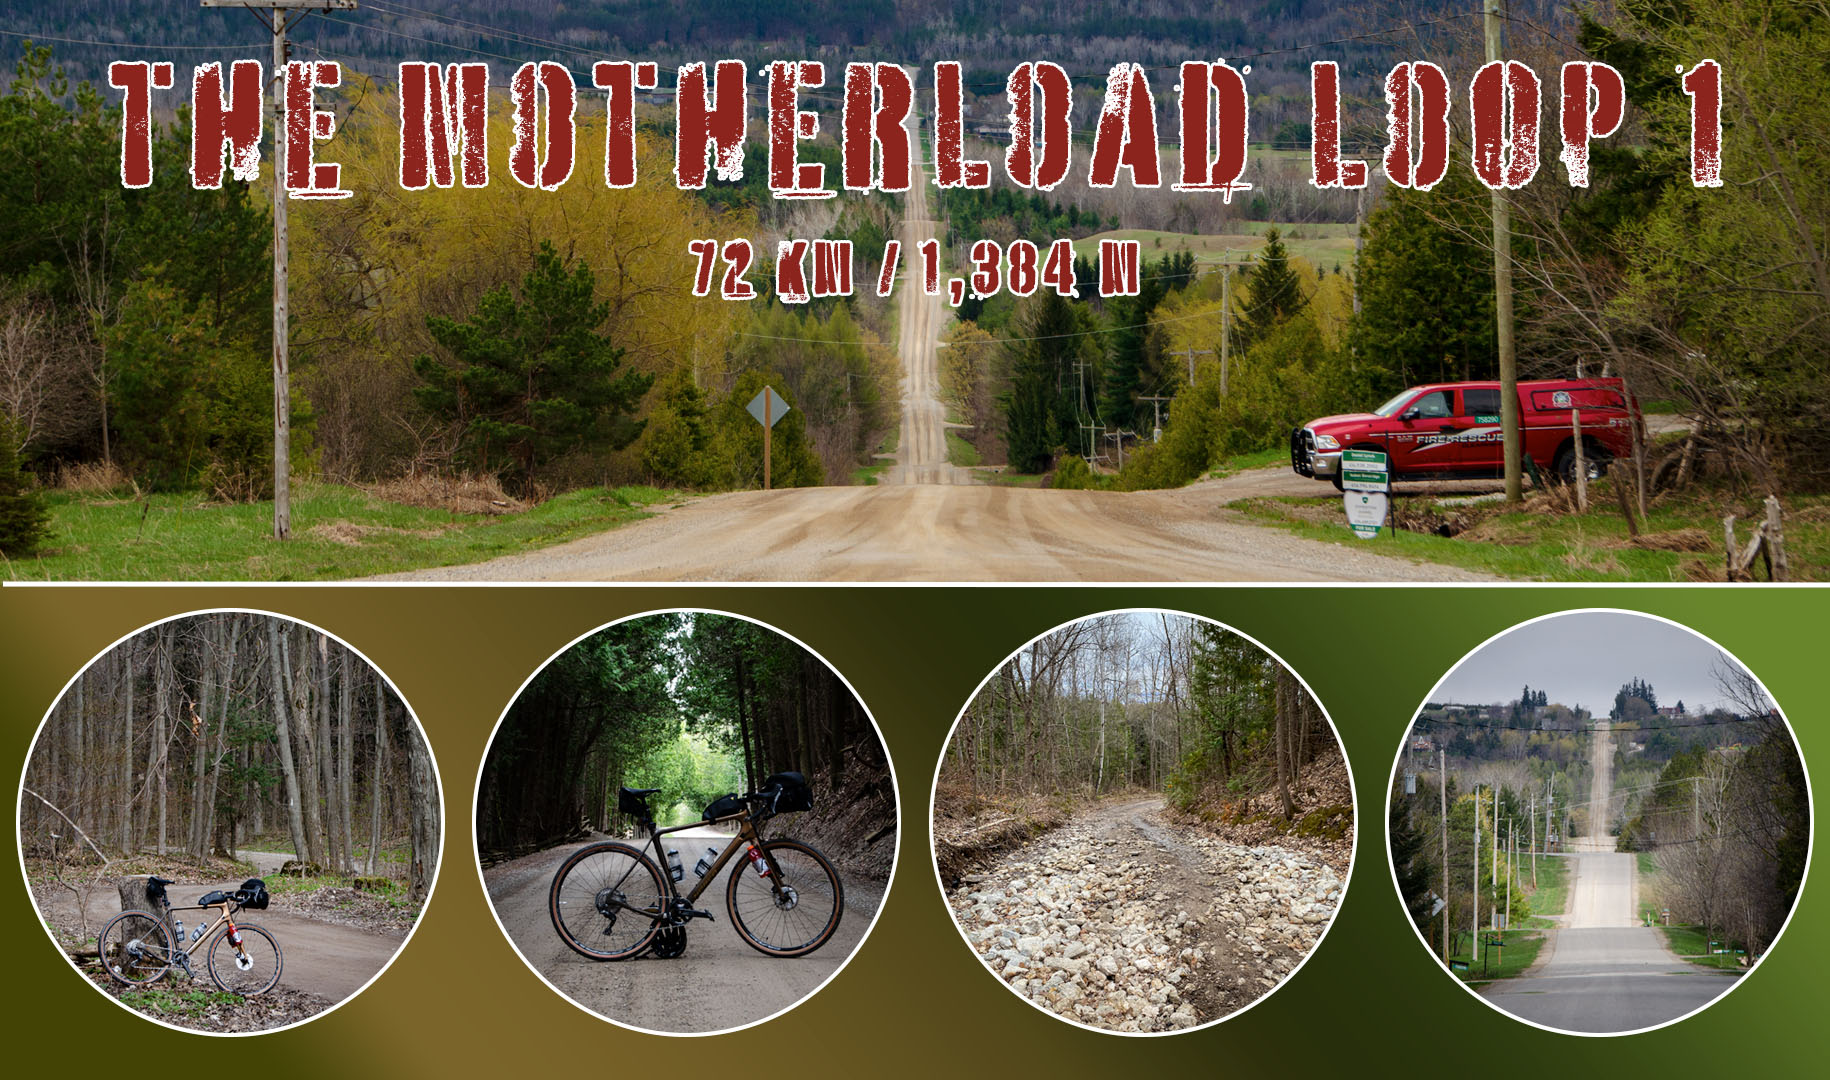 The Motherload Gravel Bike Route Loop 1 Cover Photo